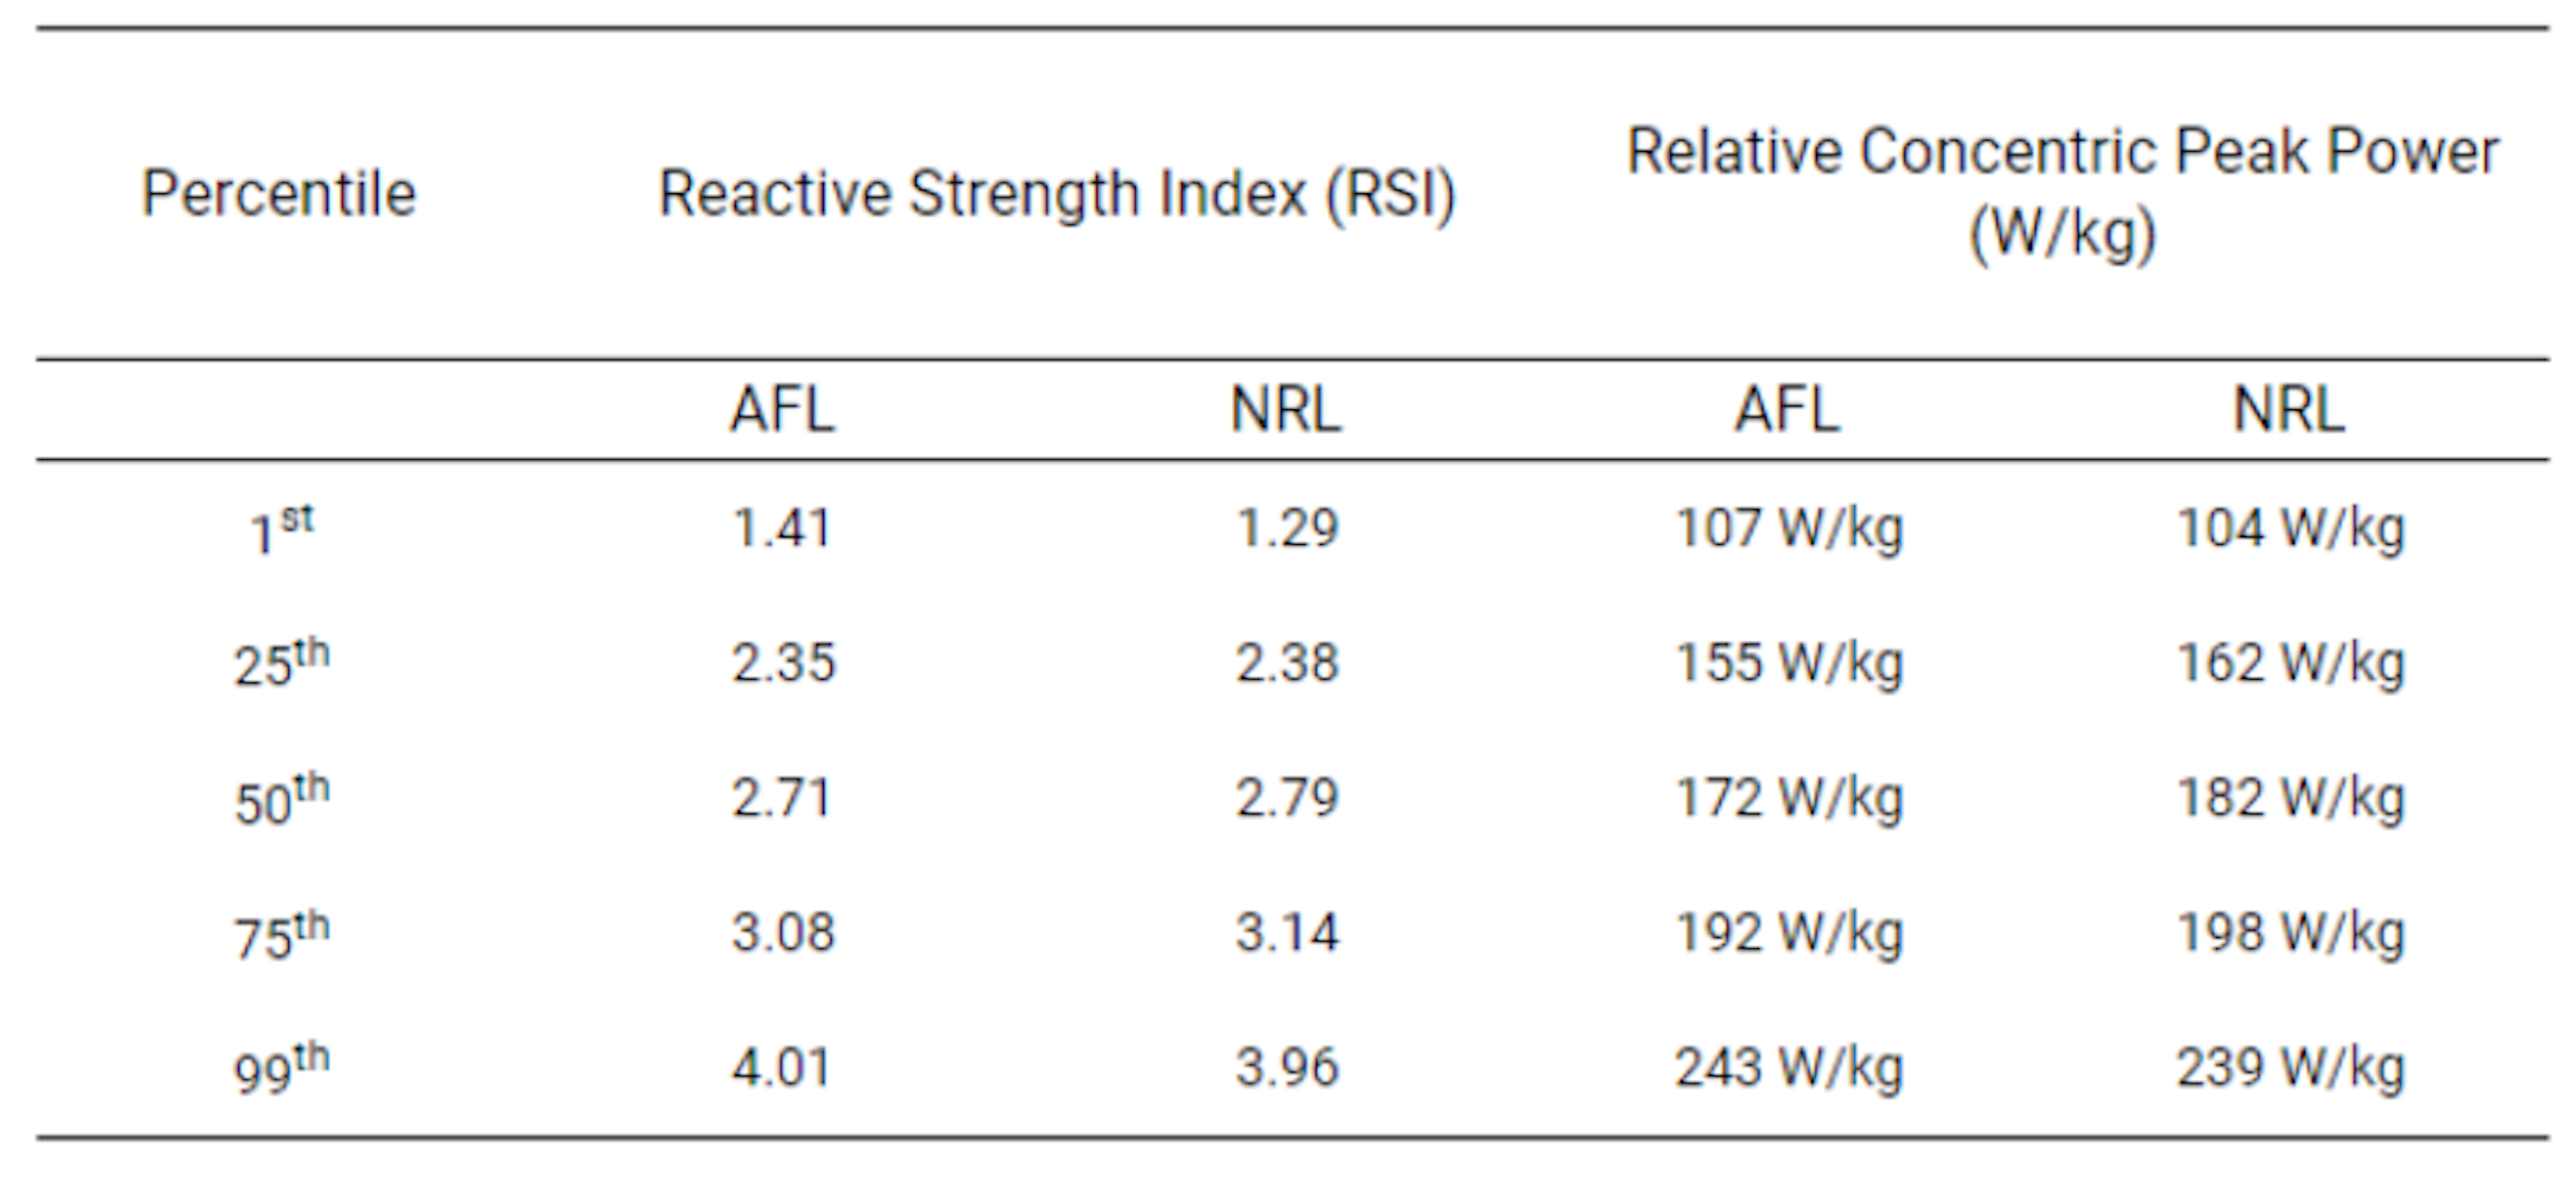 Table 2. Percentiles data on key metrics comparing the two leagues for drop jump performance.